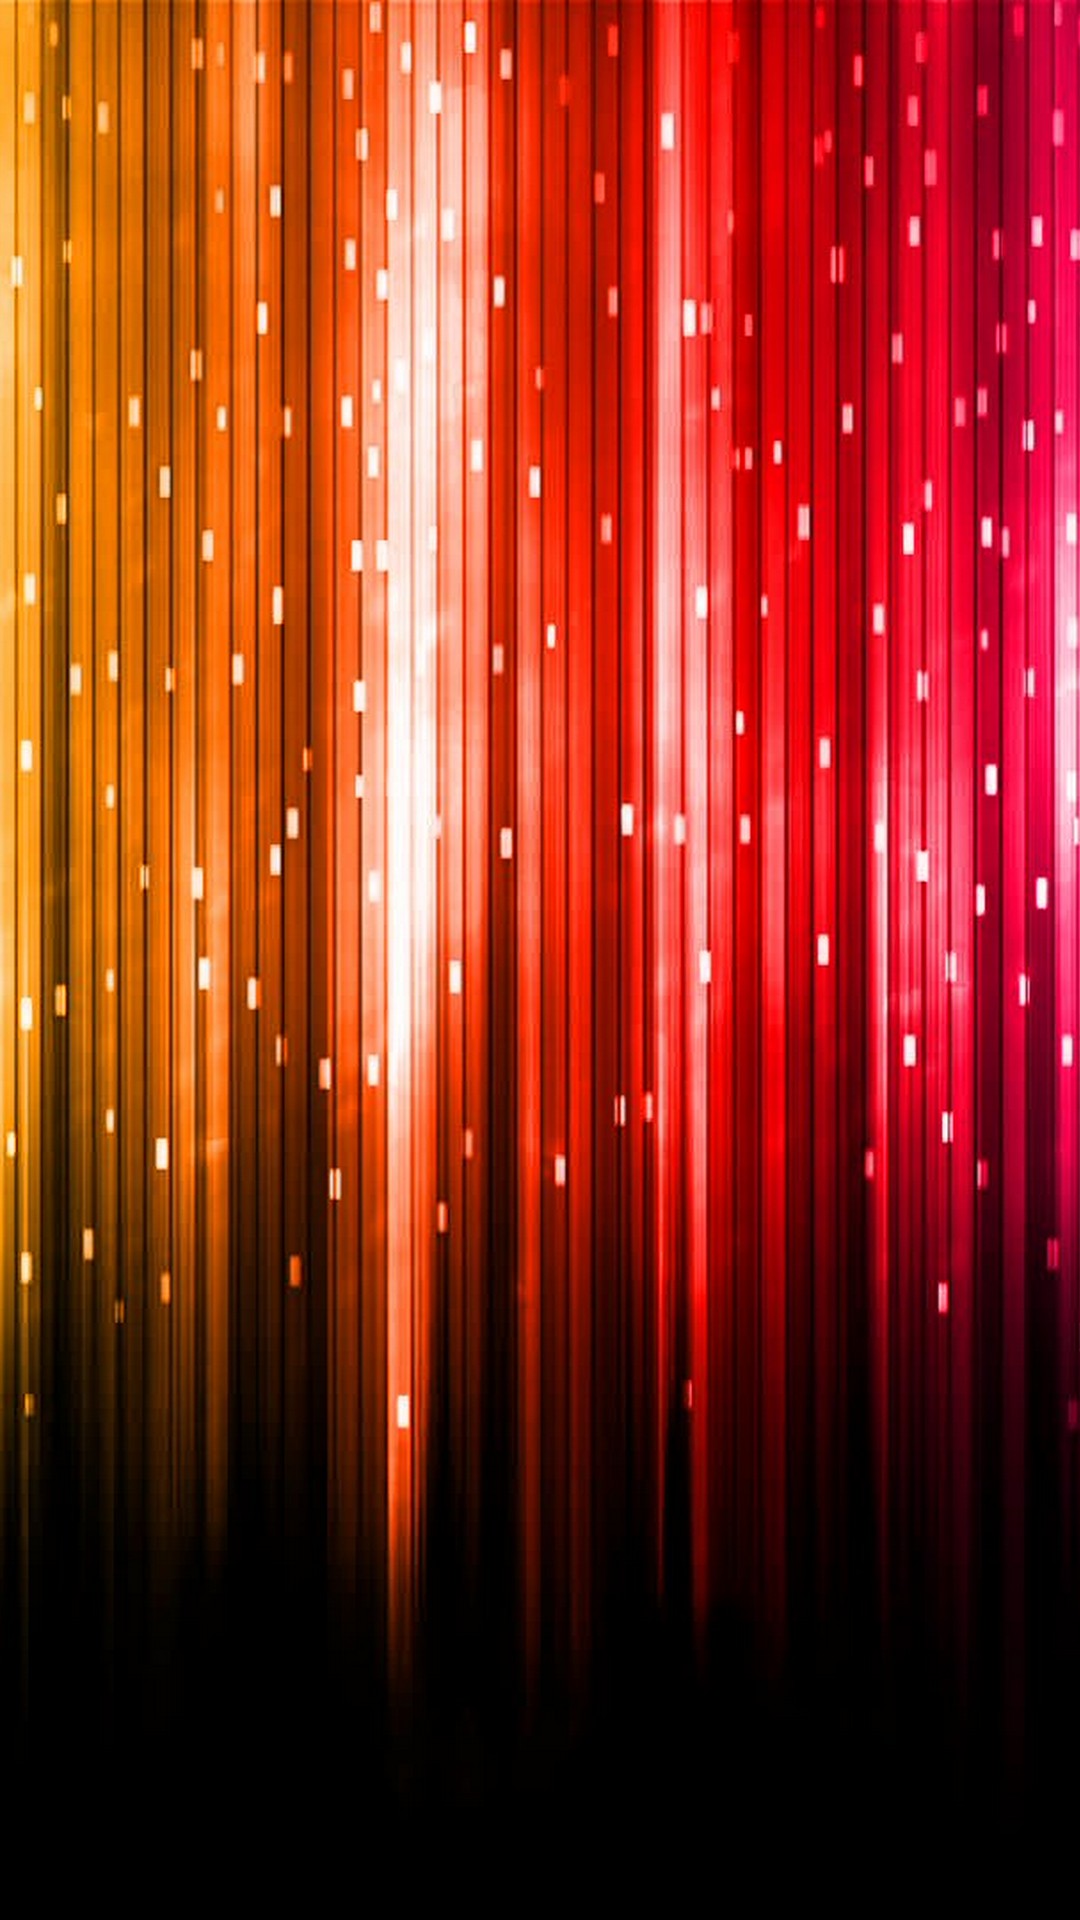 iPhone X Wallpaper Rainbow Colors with resolution 1080X1920 pixel. You can make this wallpaper for your iPhone 5, 6, 7, 8, X backgrounds, Mobile Screensaver, or iPad Lock Screen